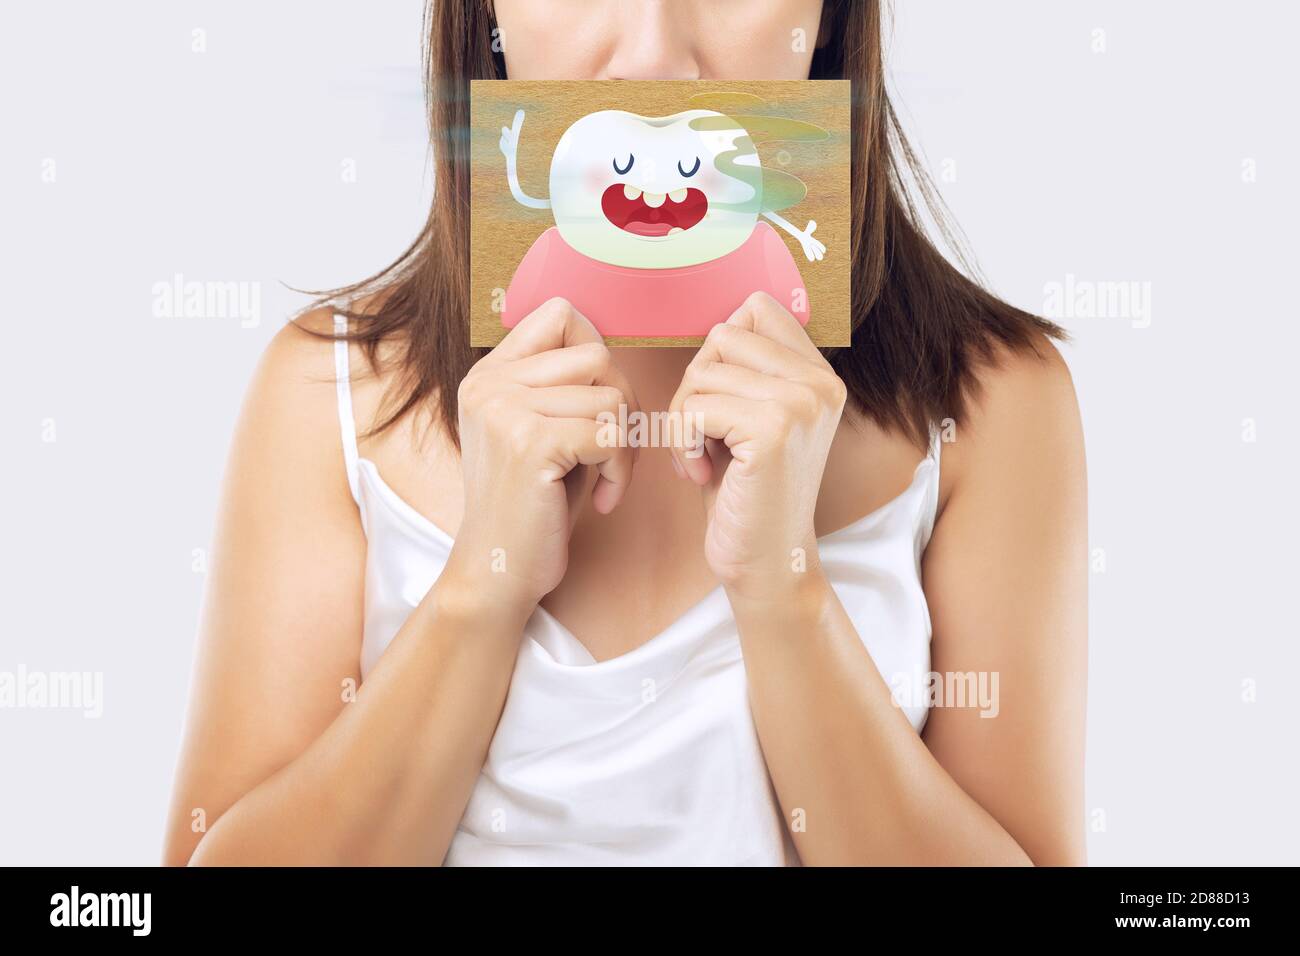 A woman wearing a white dress holding a white paper with an open mouth cartoon image. On a light gray background. Bad breath or Halitosis. The concept Stock Photo